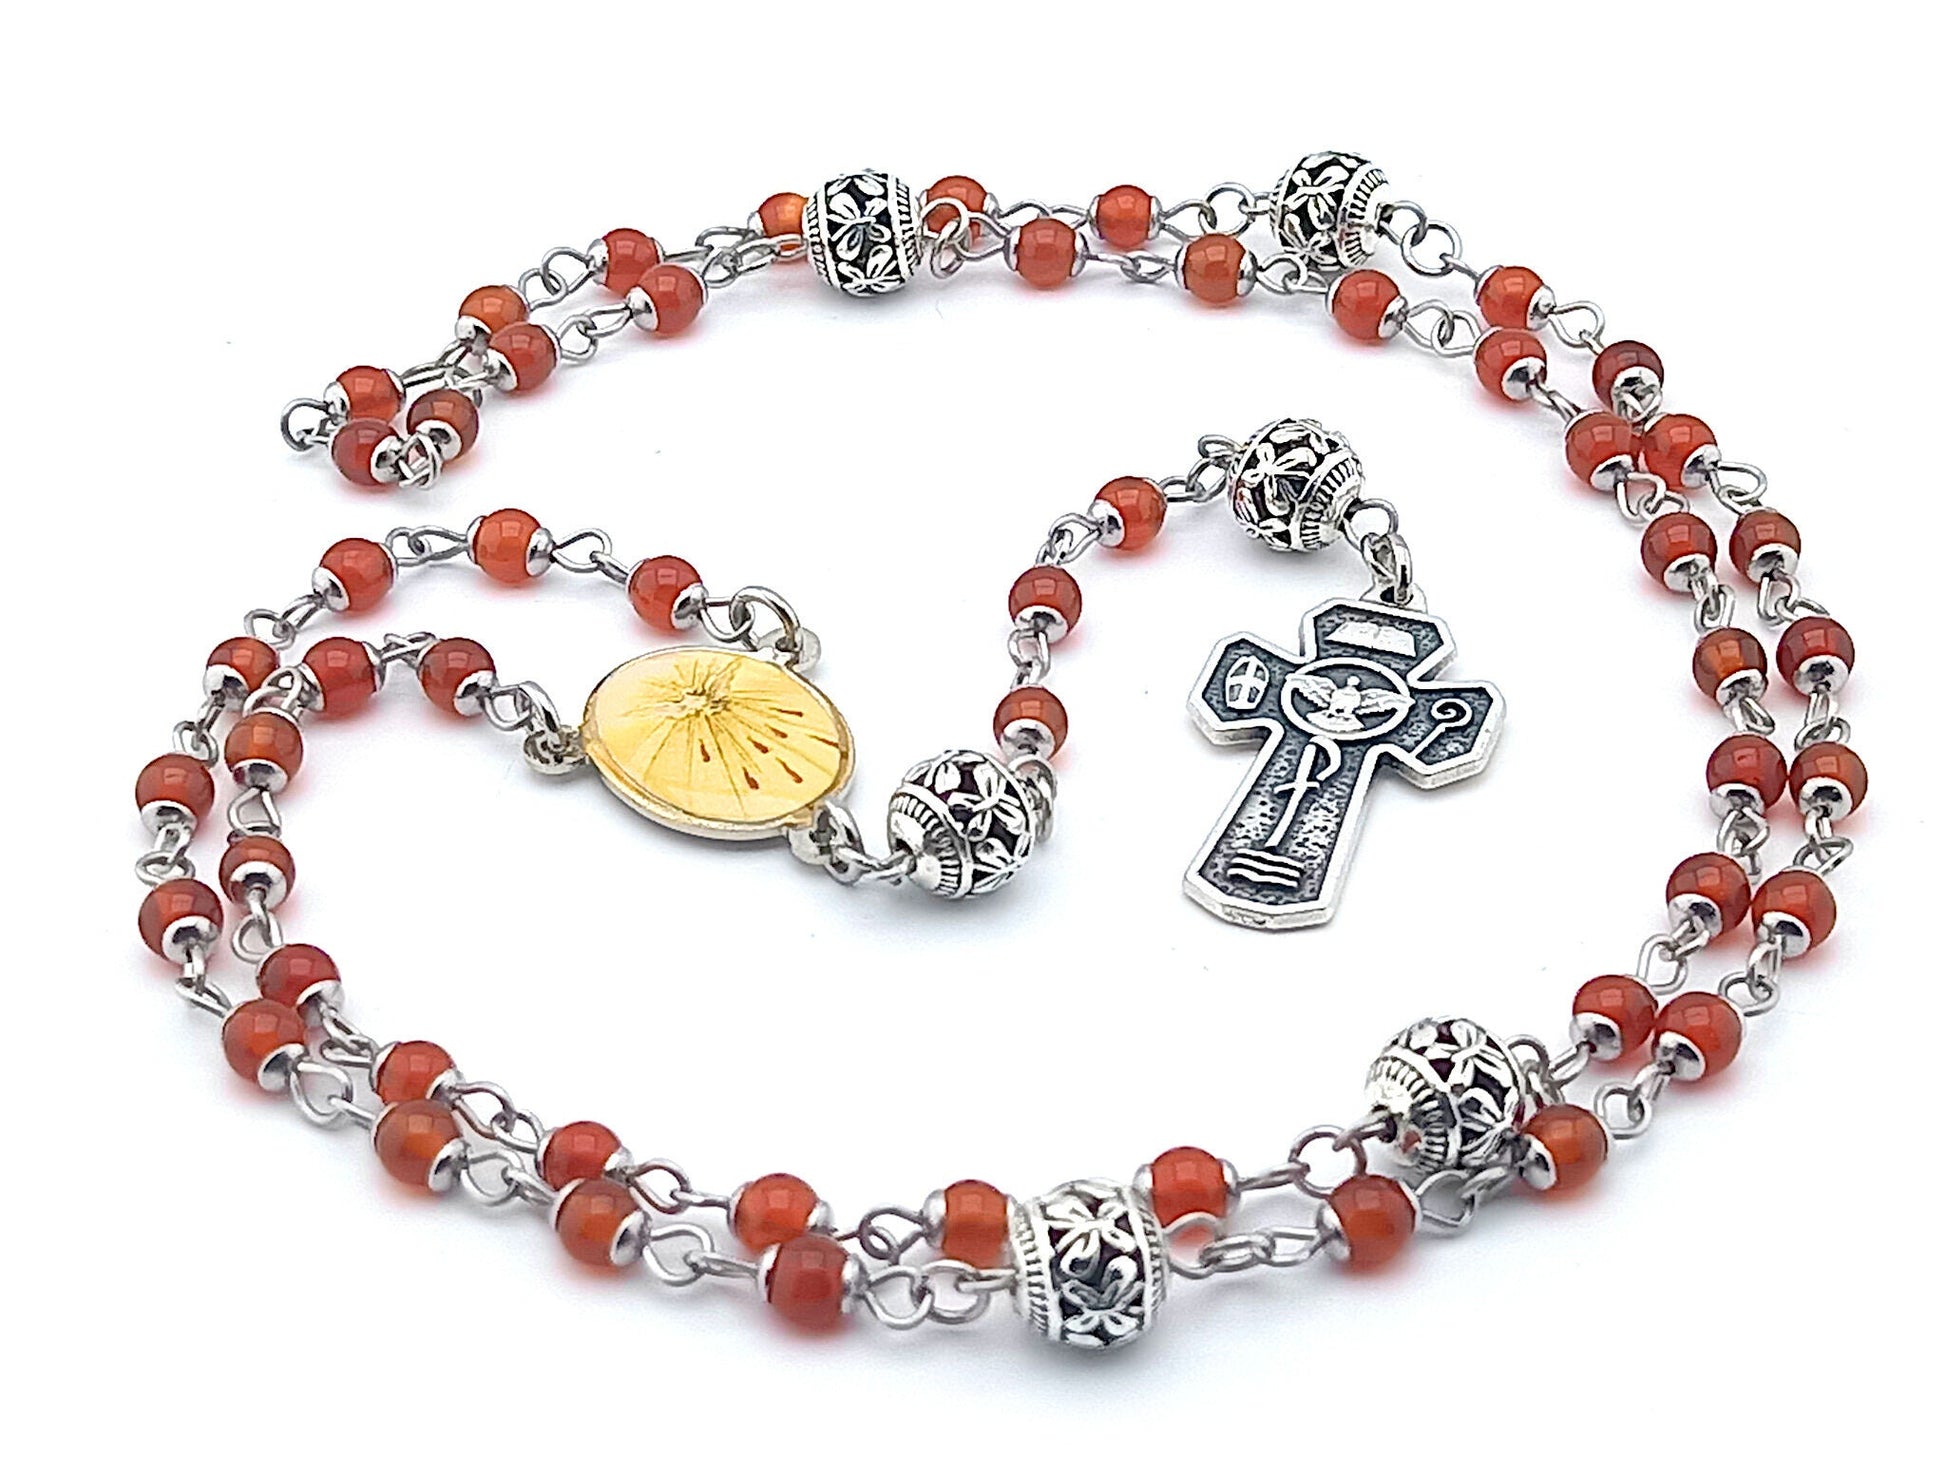 Holy Spirit unique rosary beads miniature rosary with red gemstone and silver beads, Holy Spirit crucifix and centre medal.